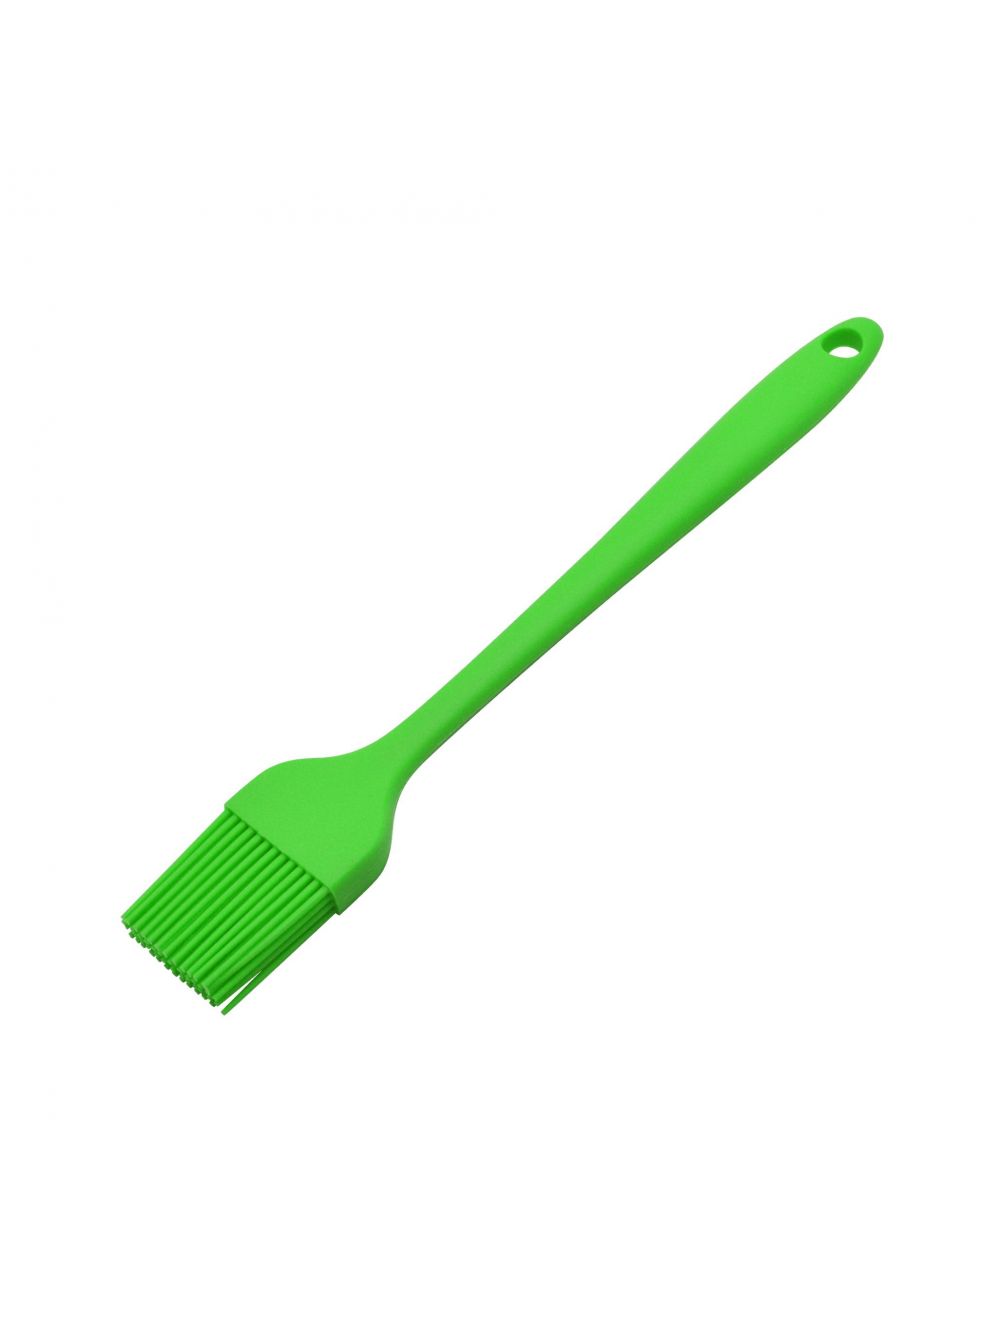 RK Silicon Pastry Brush Size Green-RNTP22-G